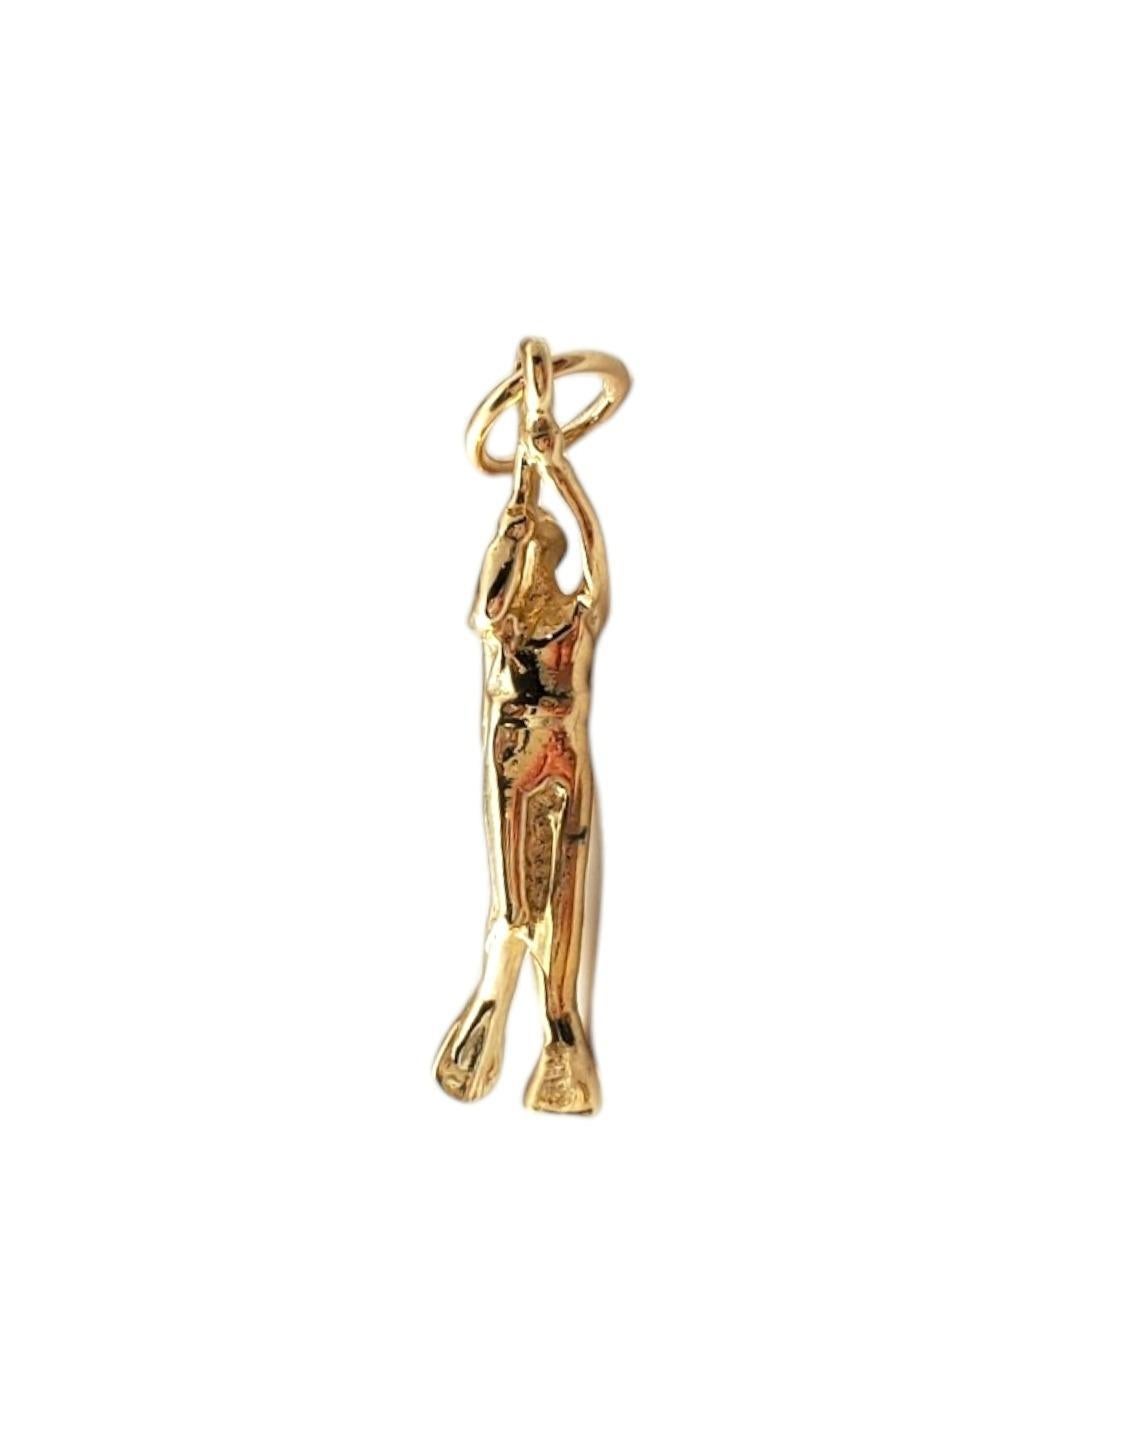 14K Yellow Gold Scuba Diver Charm 

Dive into charm with this 14K yellow gold scuba diver charm!

Size: 25.3mm X 7.3mm X 3.6mm

Weight: 1.1dwt. / 1.7 gr.

Marked: 14K

Very good condition, professionally polished.
Will come packaged in a gift box or